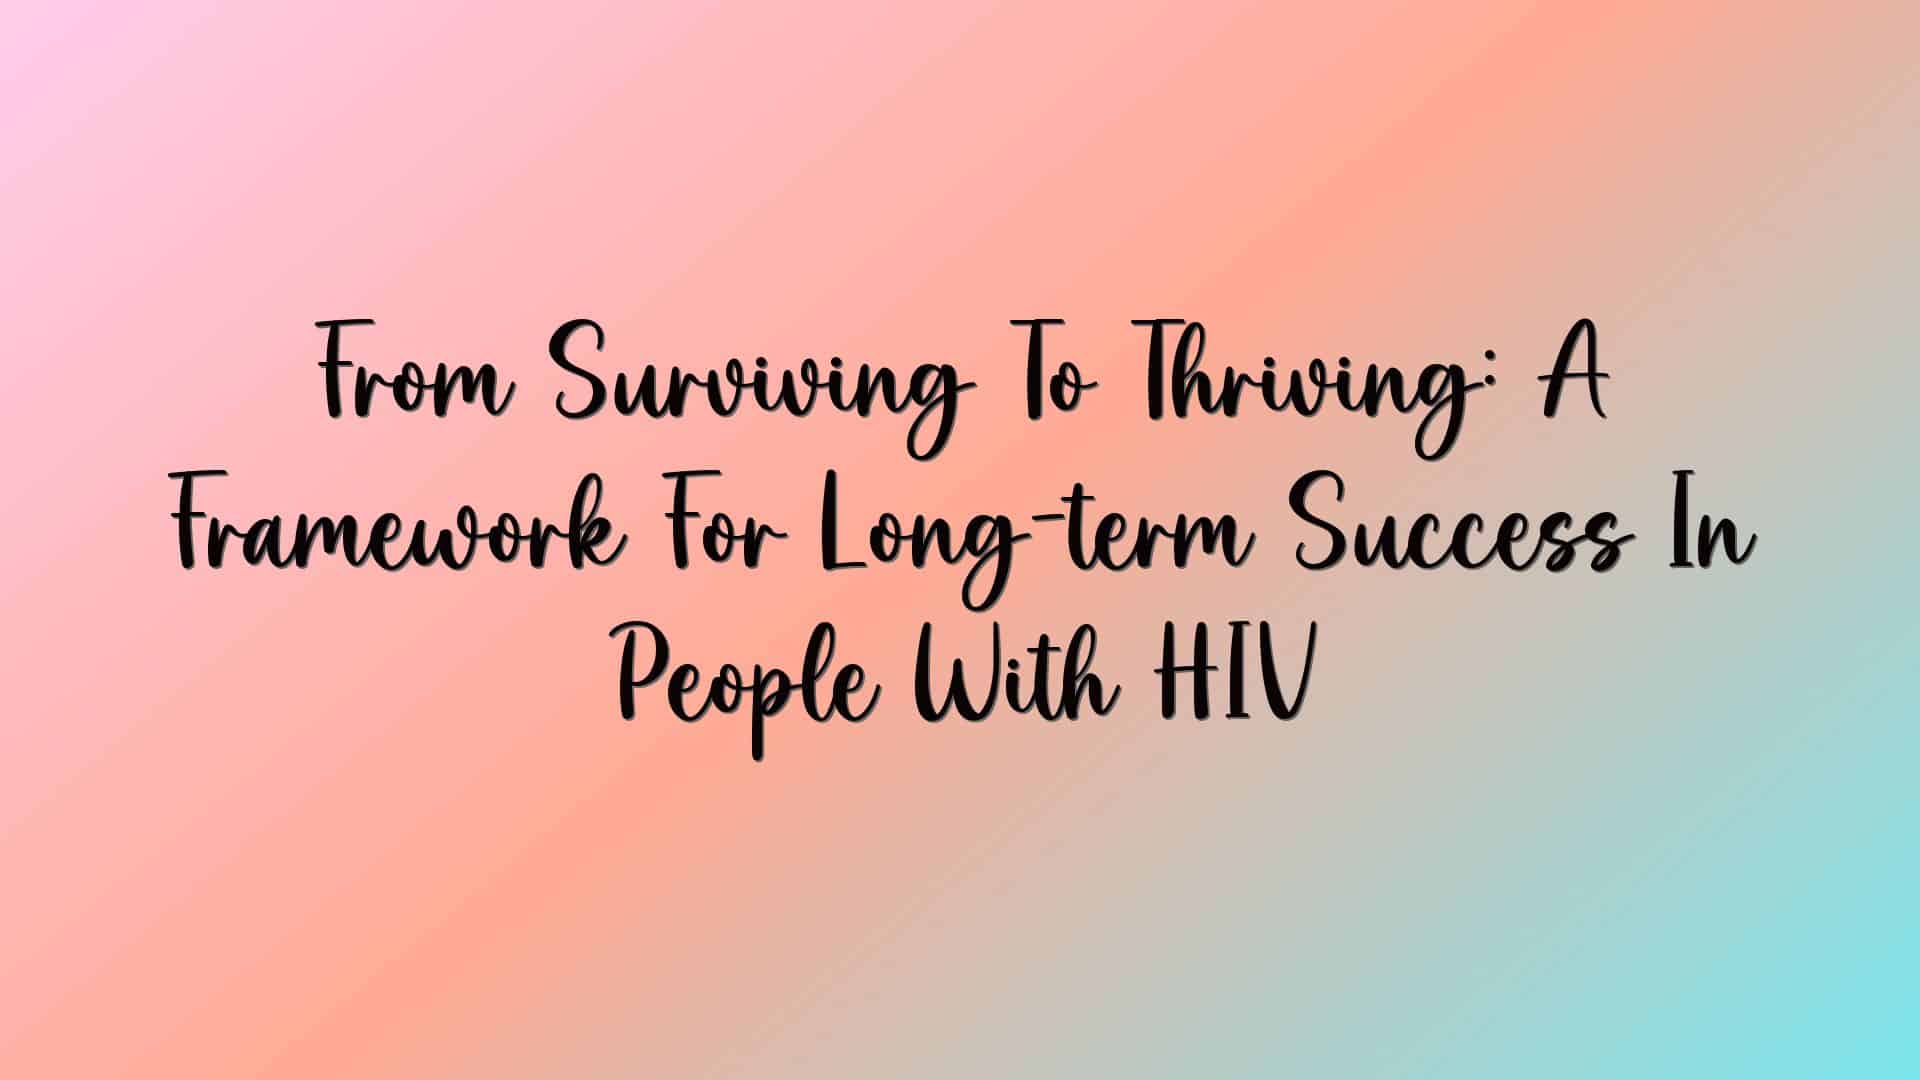 From Surviving To Thriving: A Framework For Long-term Success In People With HIV